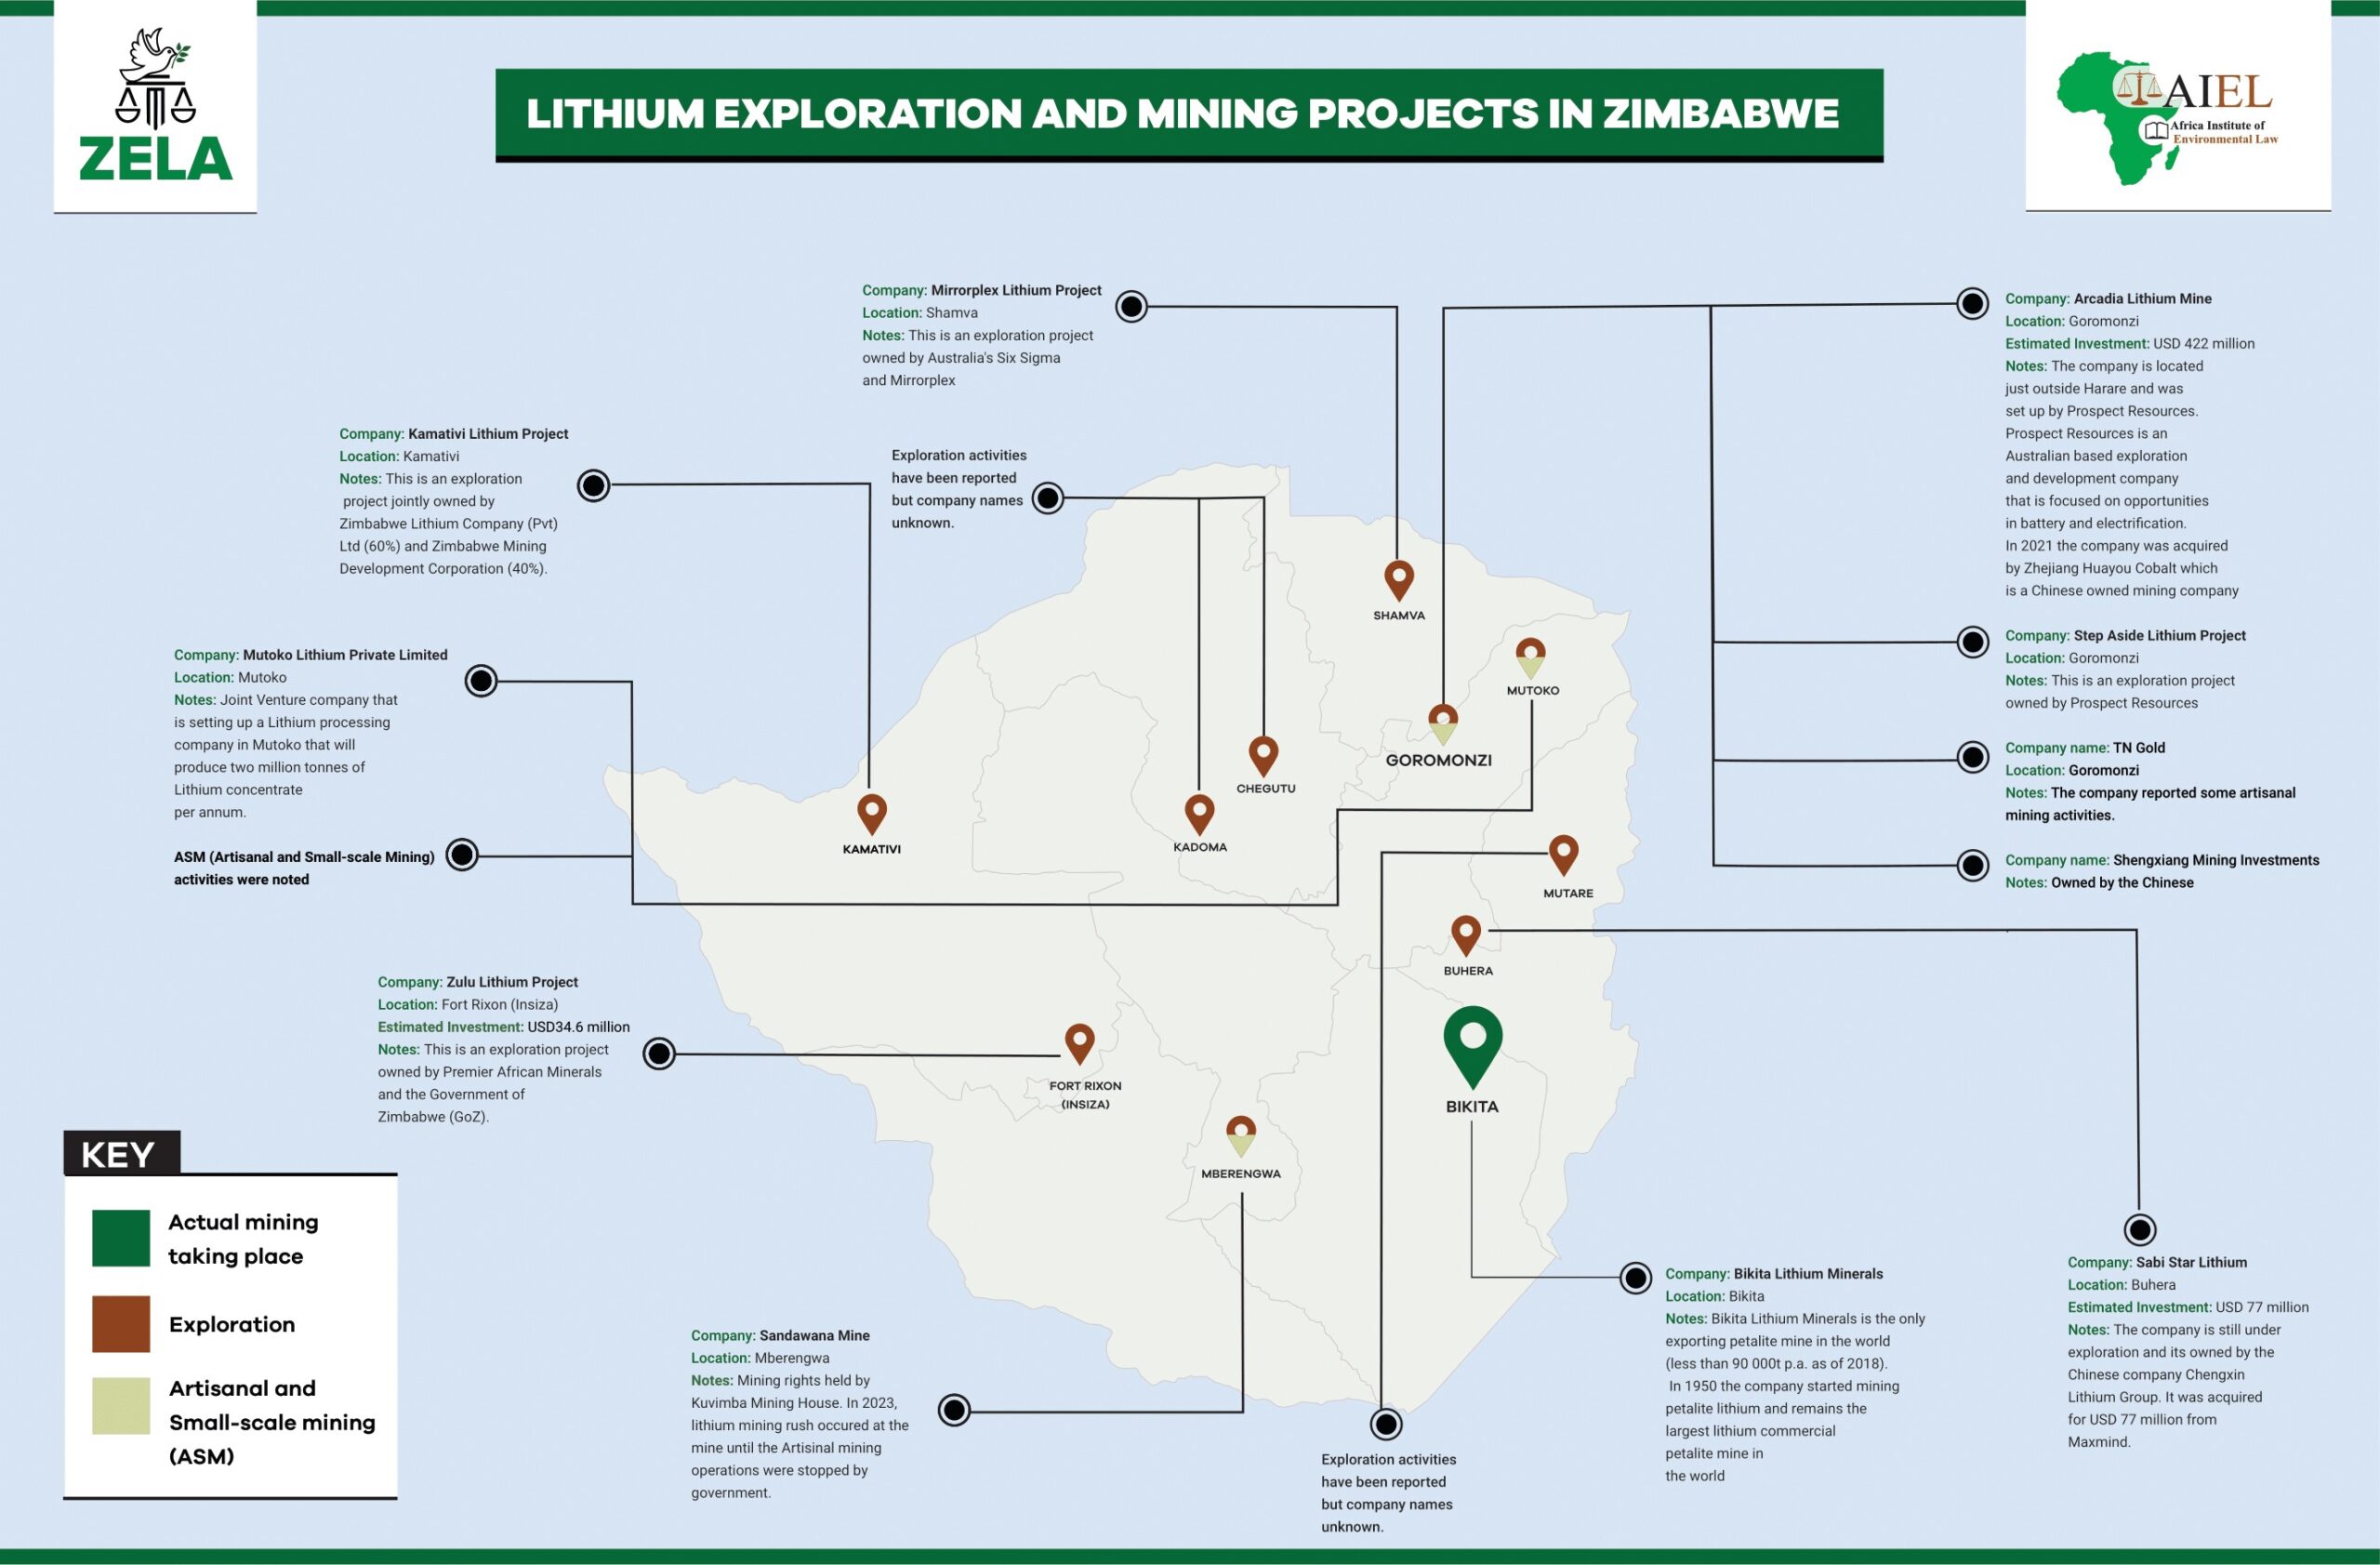 Chinese dominance in Zimbabwe's lithium mines: Potential risks,  vulnerabilities and opportunities in the critical minerals sector - IPIS